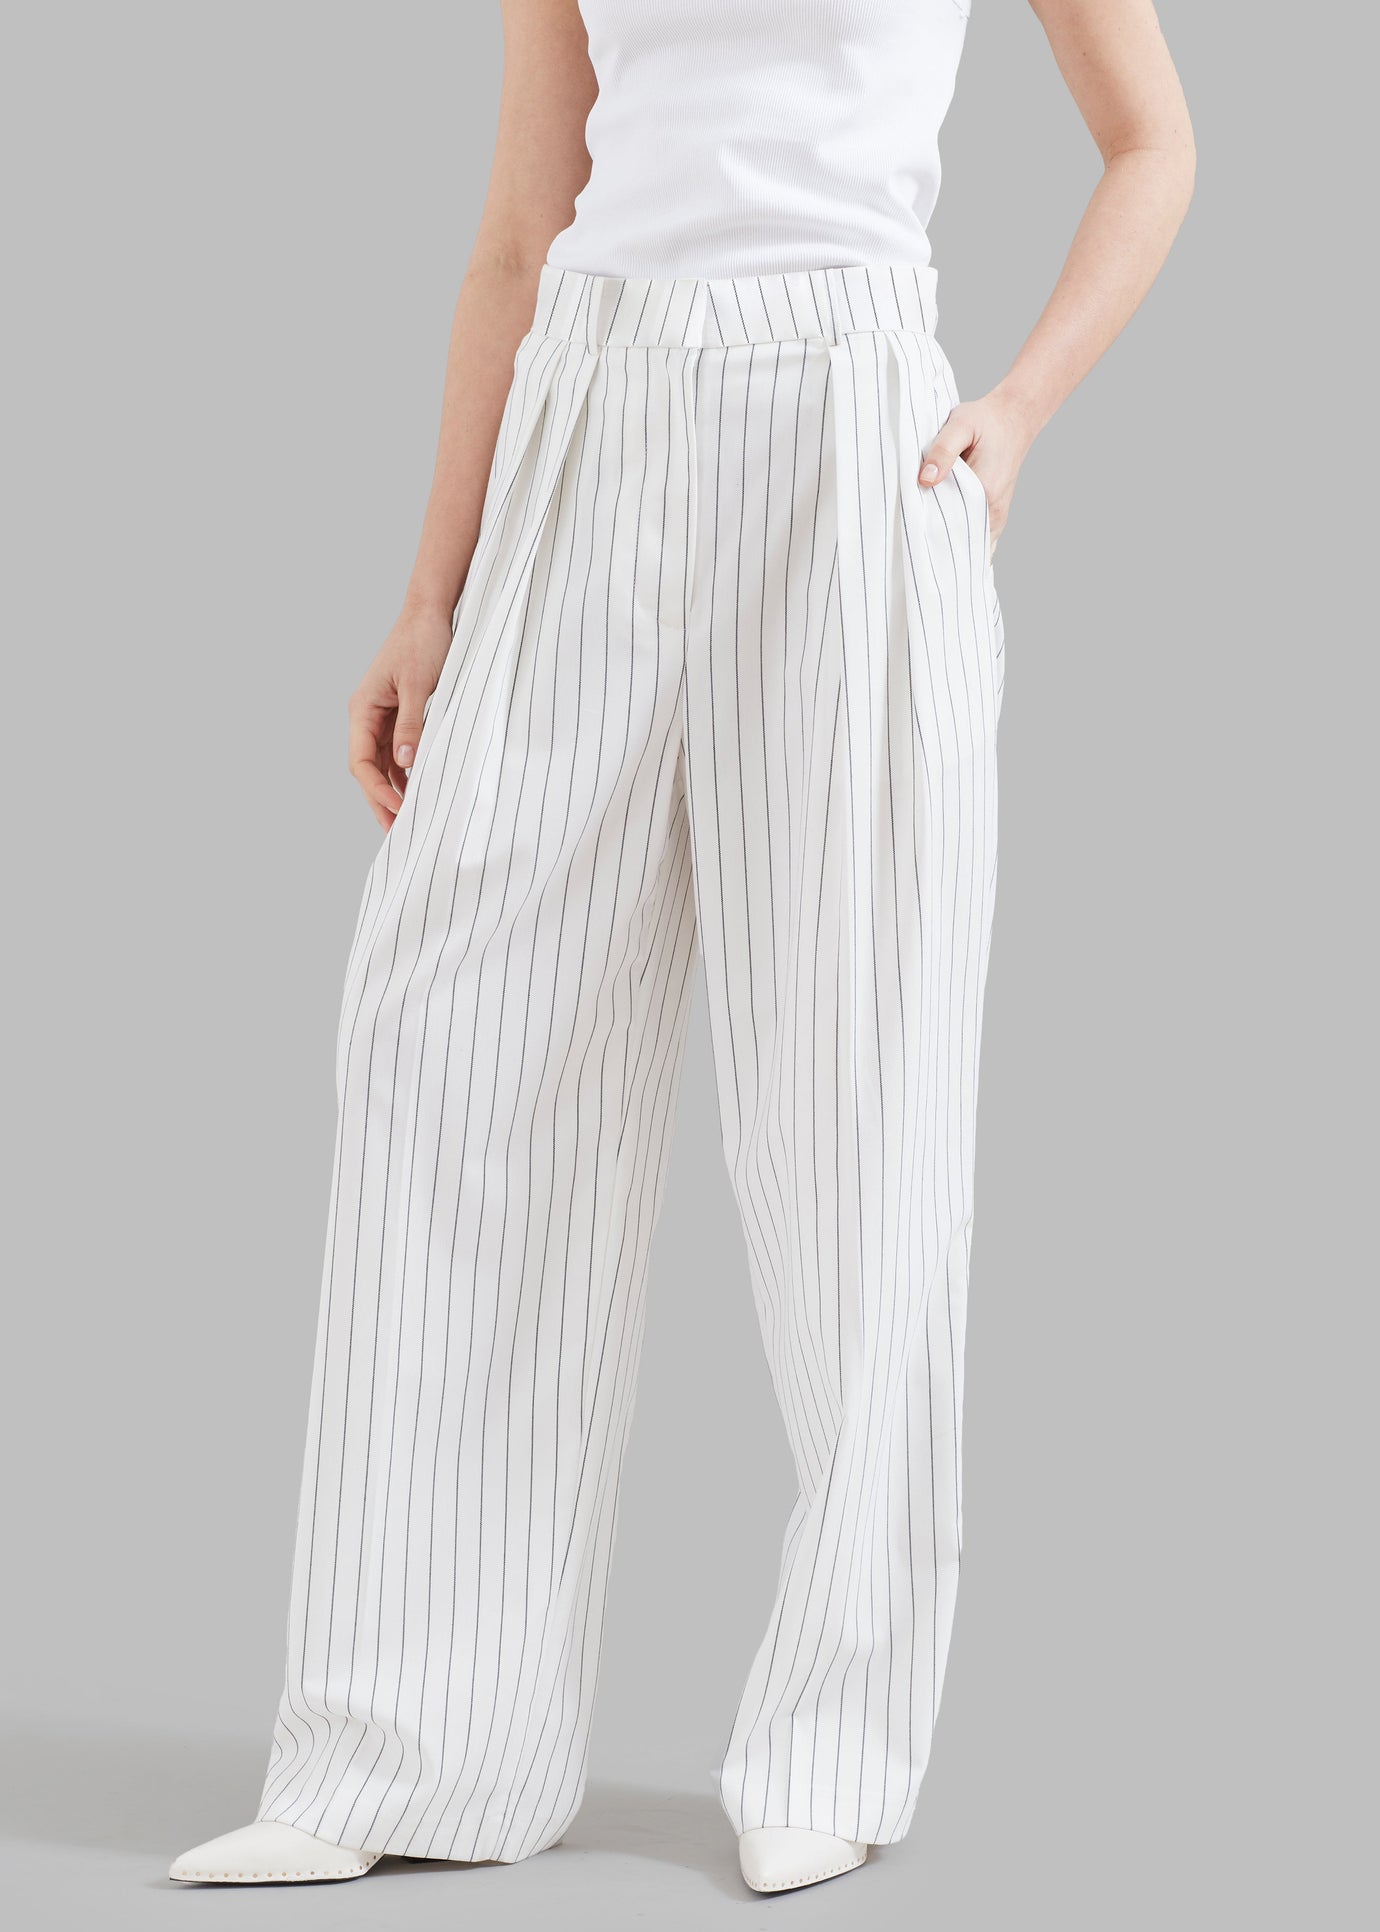 Tansy Fluid Pleated Trousers - White - 1